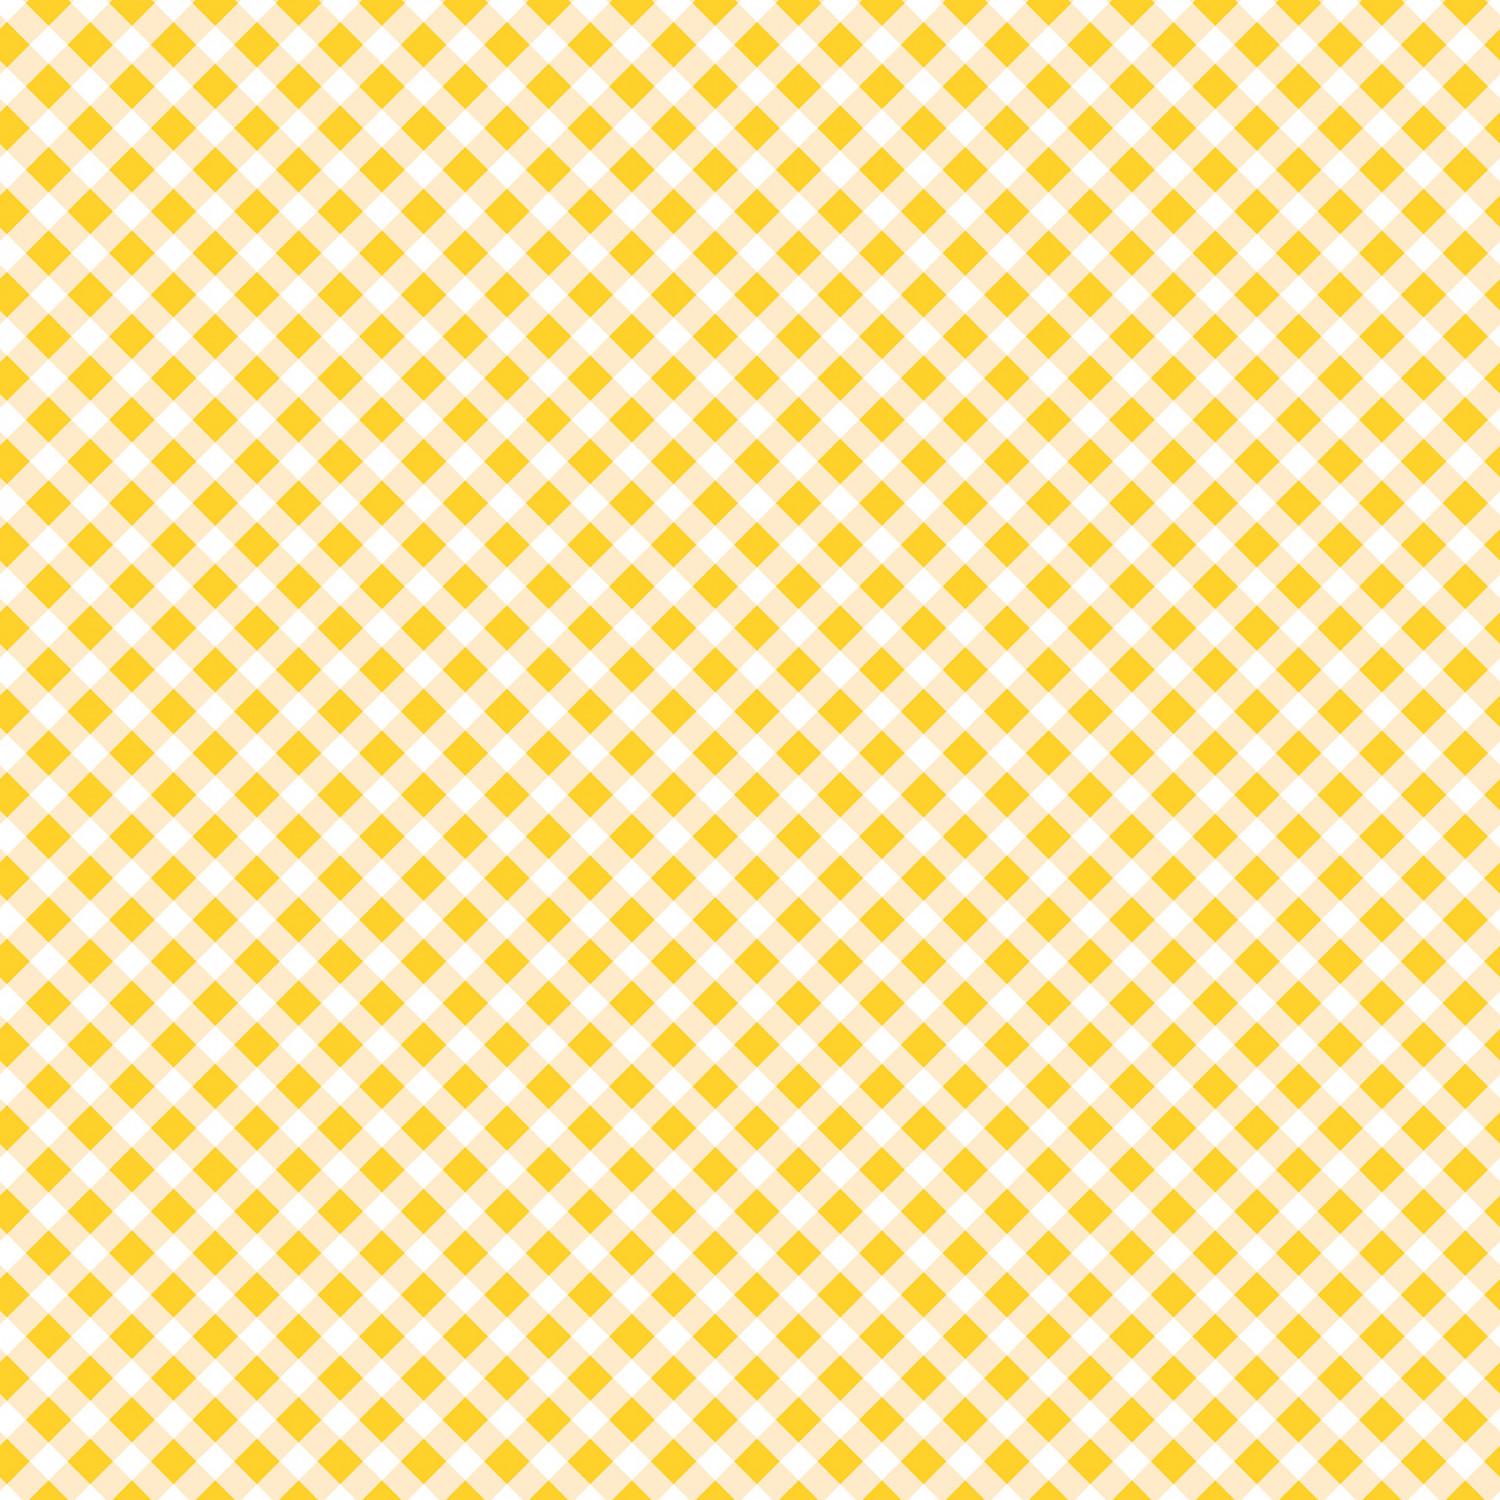 Playtime Flannel - Bias Gingham - Yellow - MASF10691-S